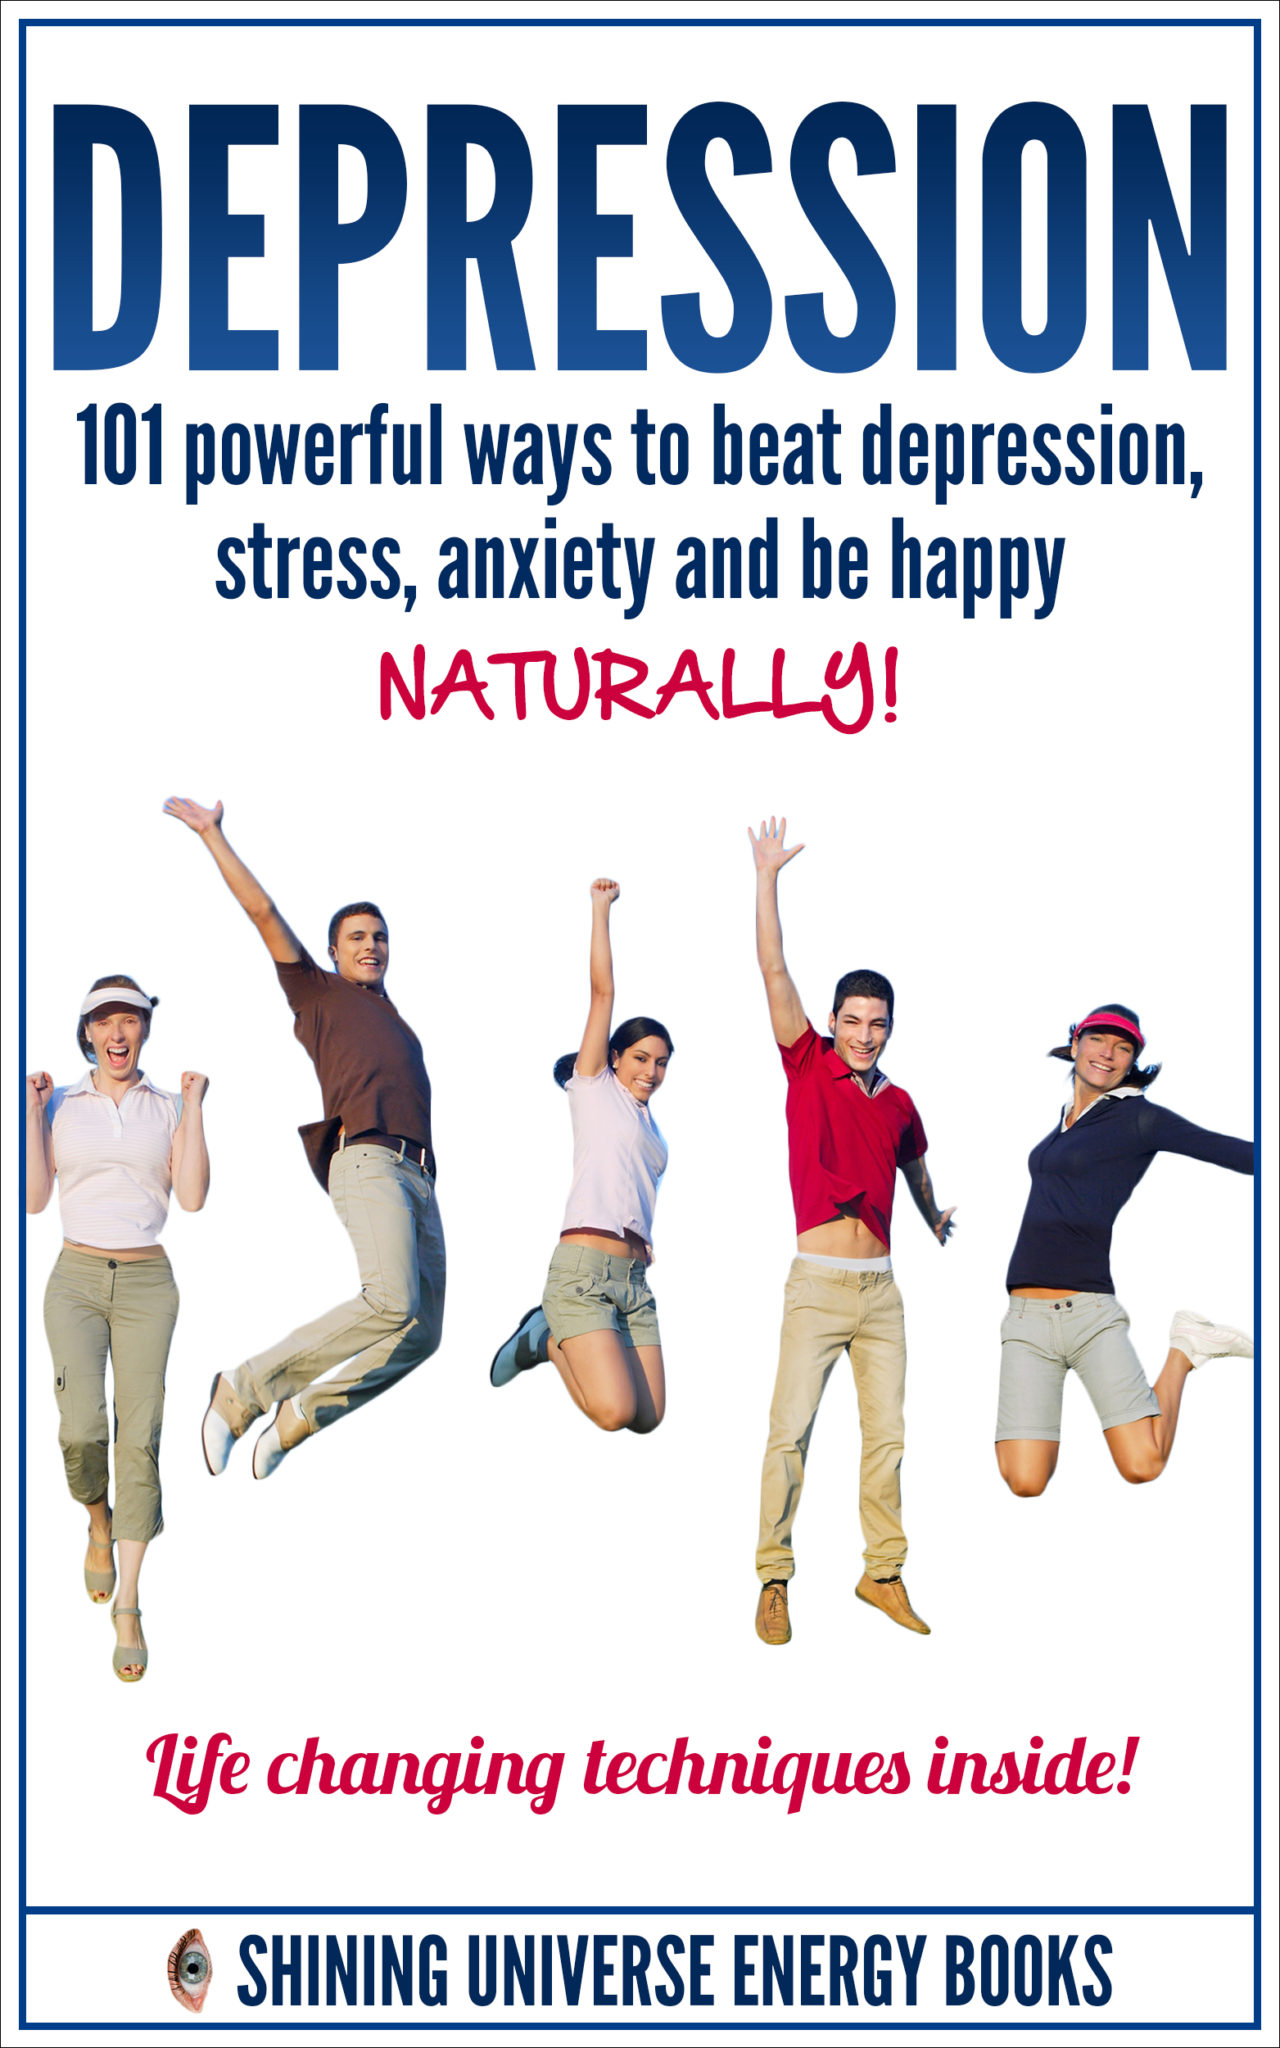 FREE: Depression: 101 Powerful Ways To Beat Depression, Stress, Anxiety And Be Happy NATURALLY! by Shining Universe Energy Books